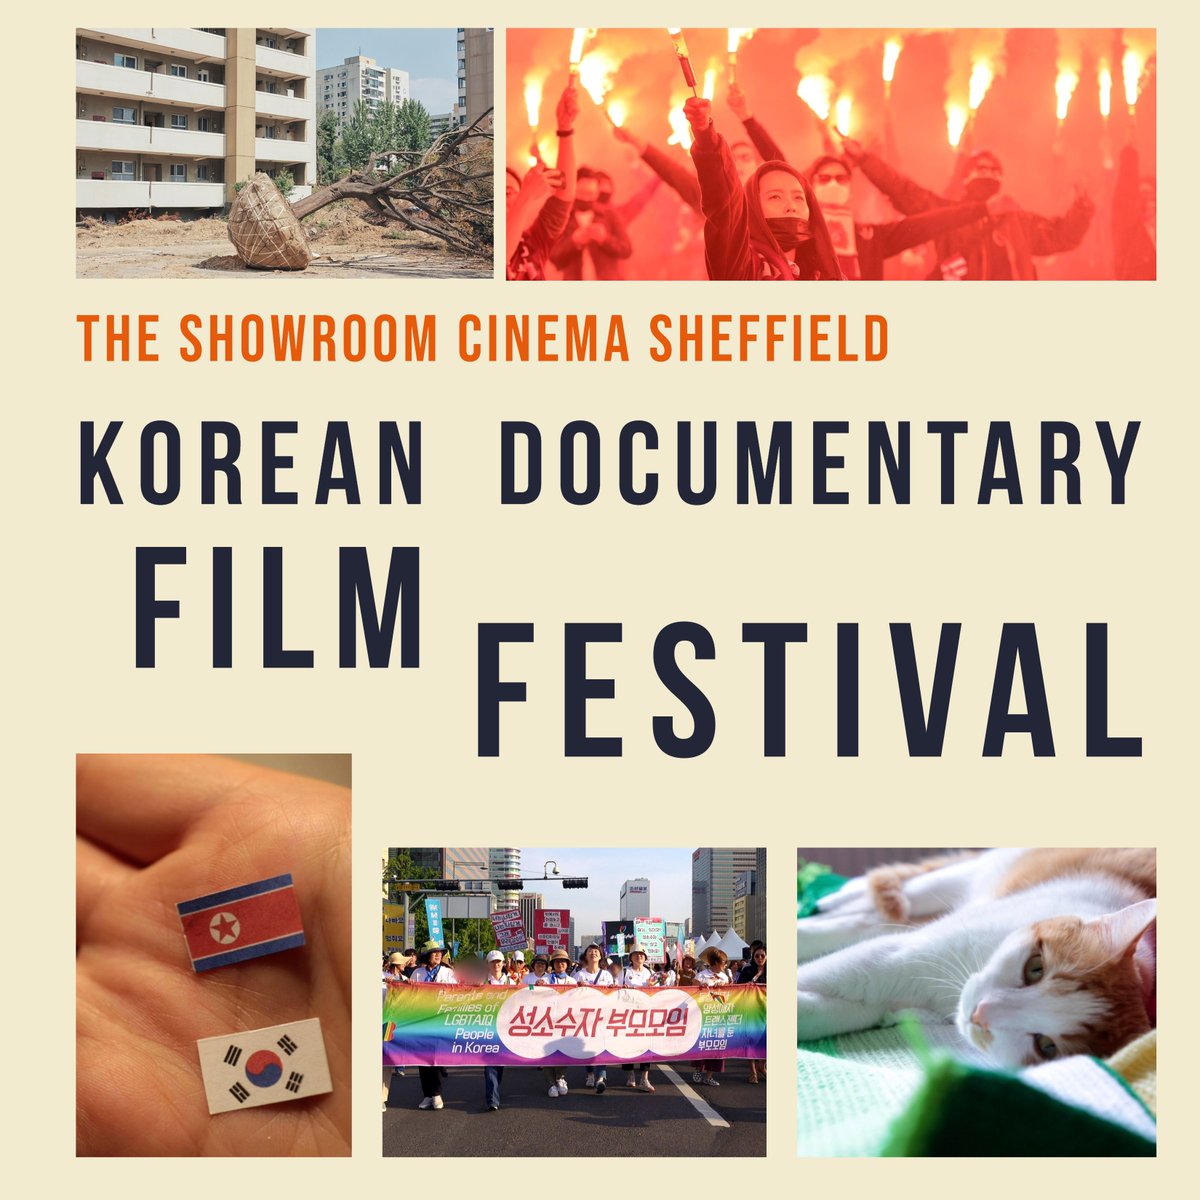 Our Korean Documentary Film Festival will start tomorrow at @showroomcinema 🎉🎟️ Focussing on bringing contemporary Korean documentary to Sheffield and showing the breadth of films that are emerging in the Korean documentary market. Book your ticket 👇 showroomworkstation.org.uk/koreandocseason